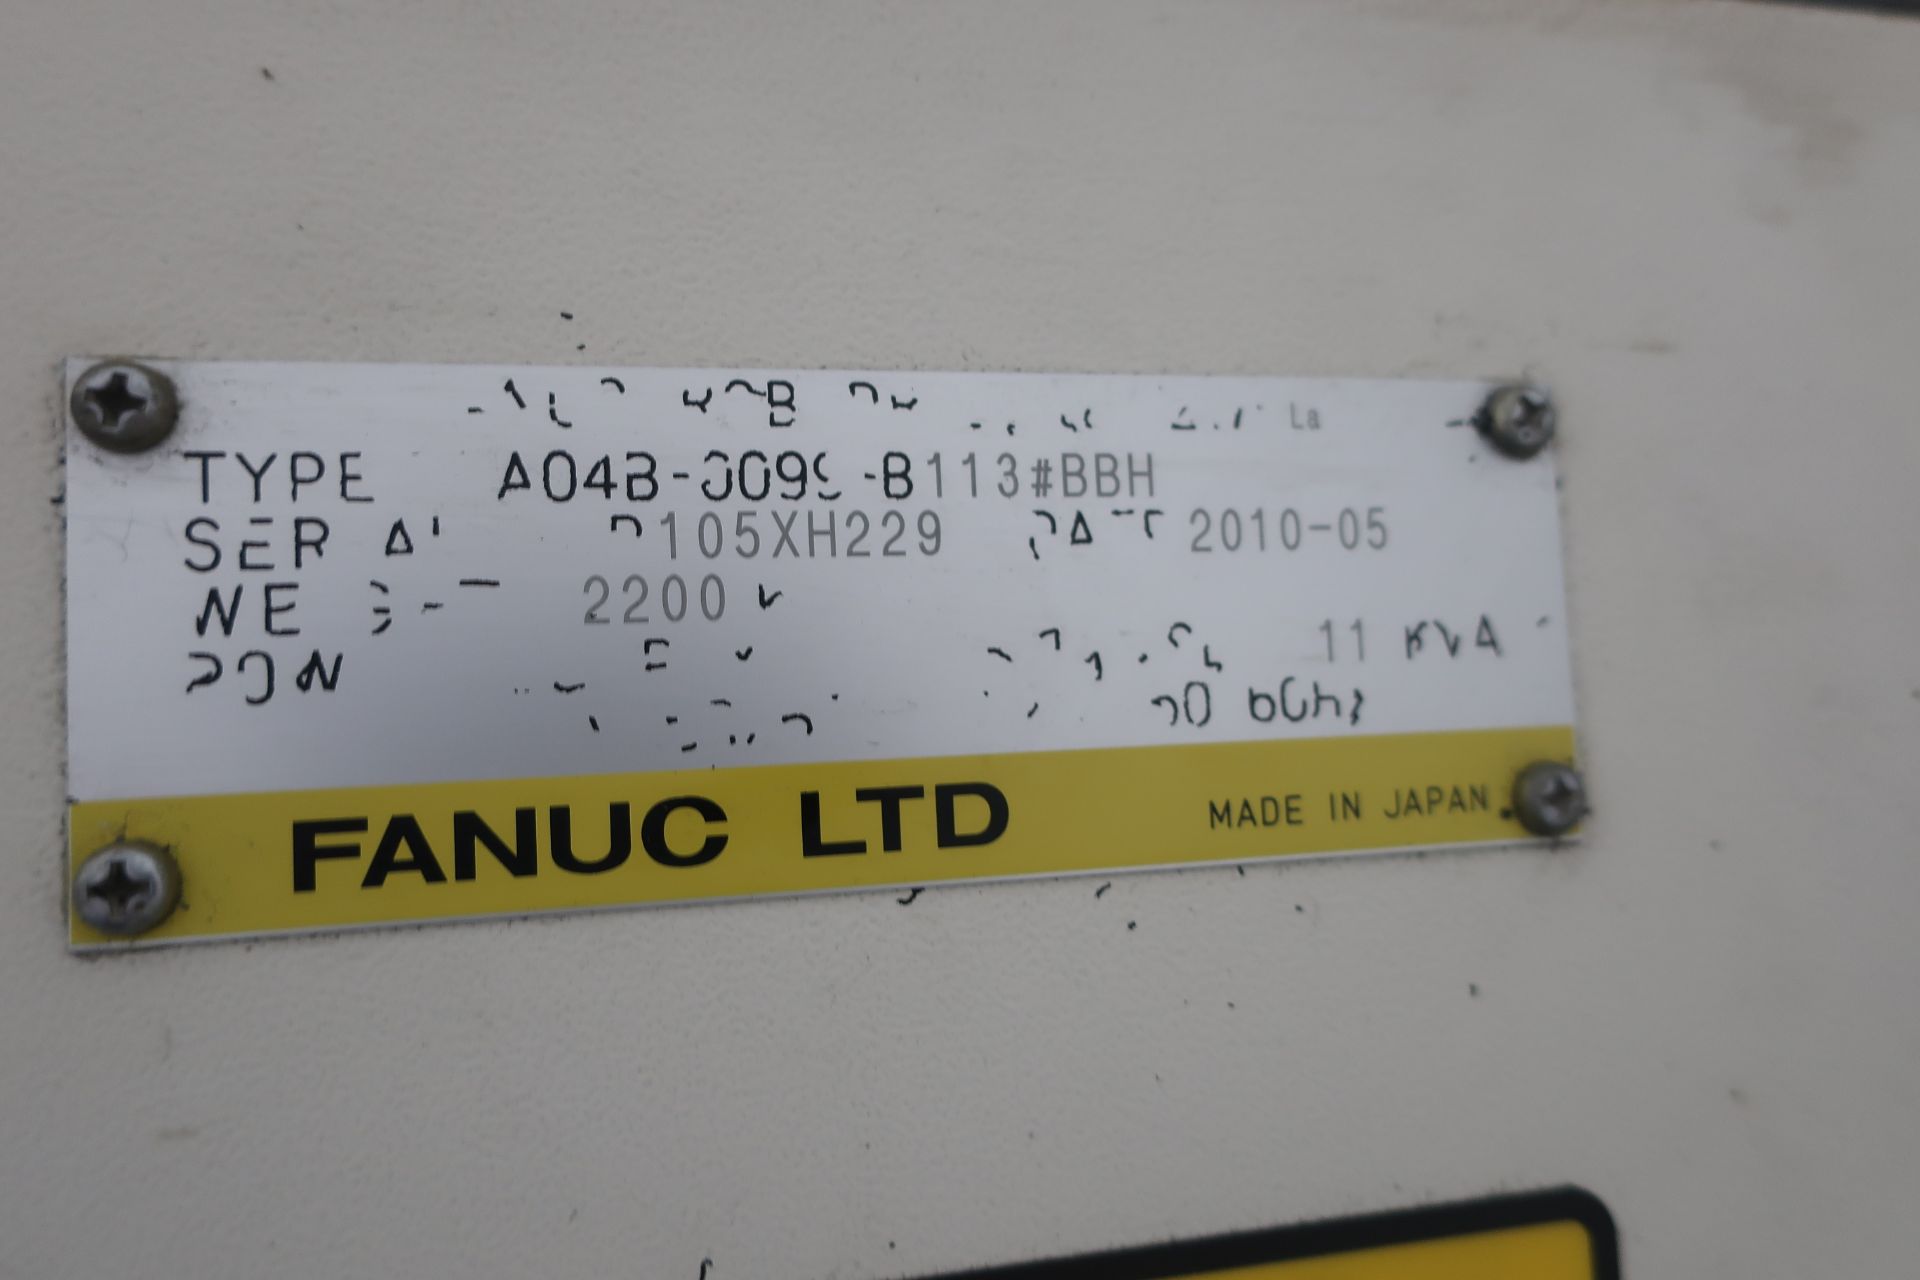 Fanuc Robodrill Alpha T21iFLA CNC Drill Tap Vertical Machining Center w/Pallet Changer, S/N P105XH22 - Image 8 of 10